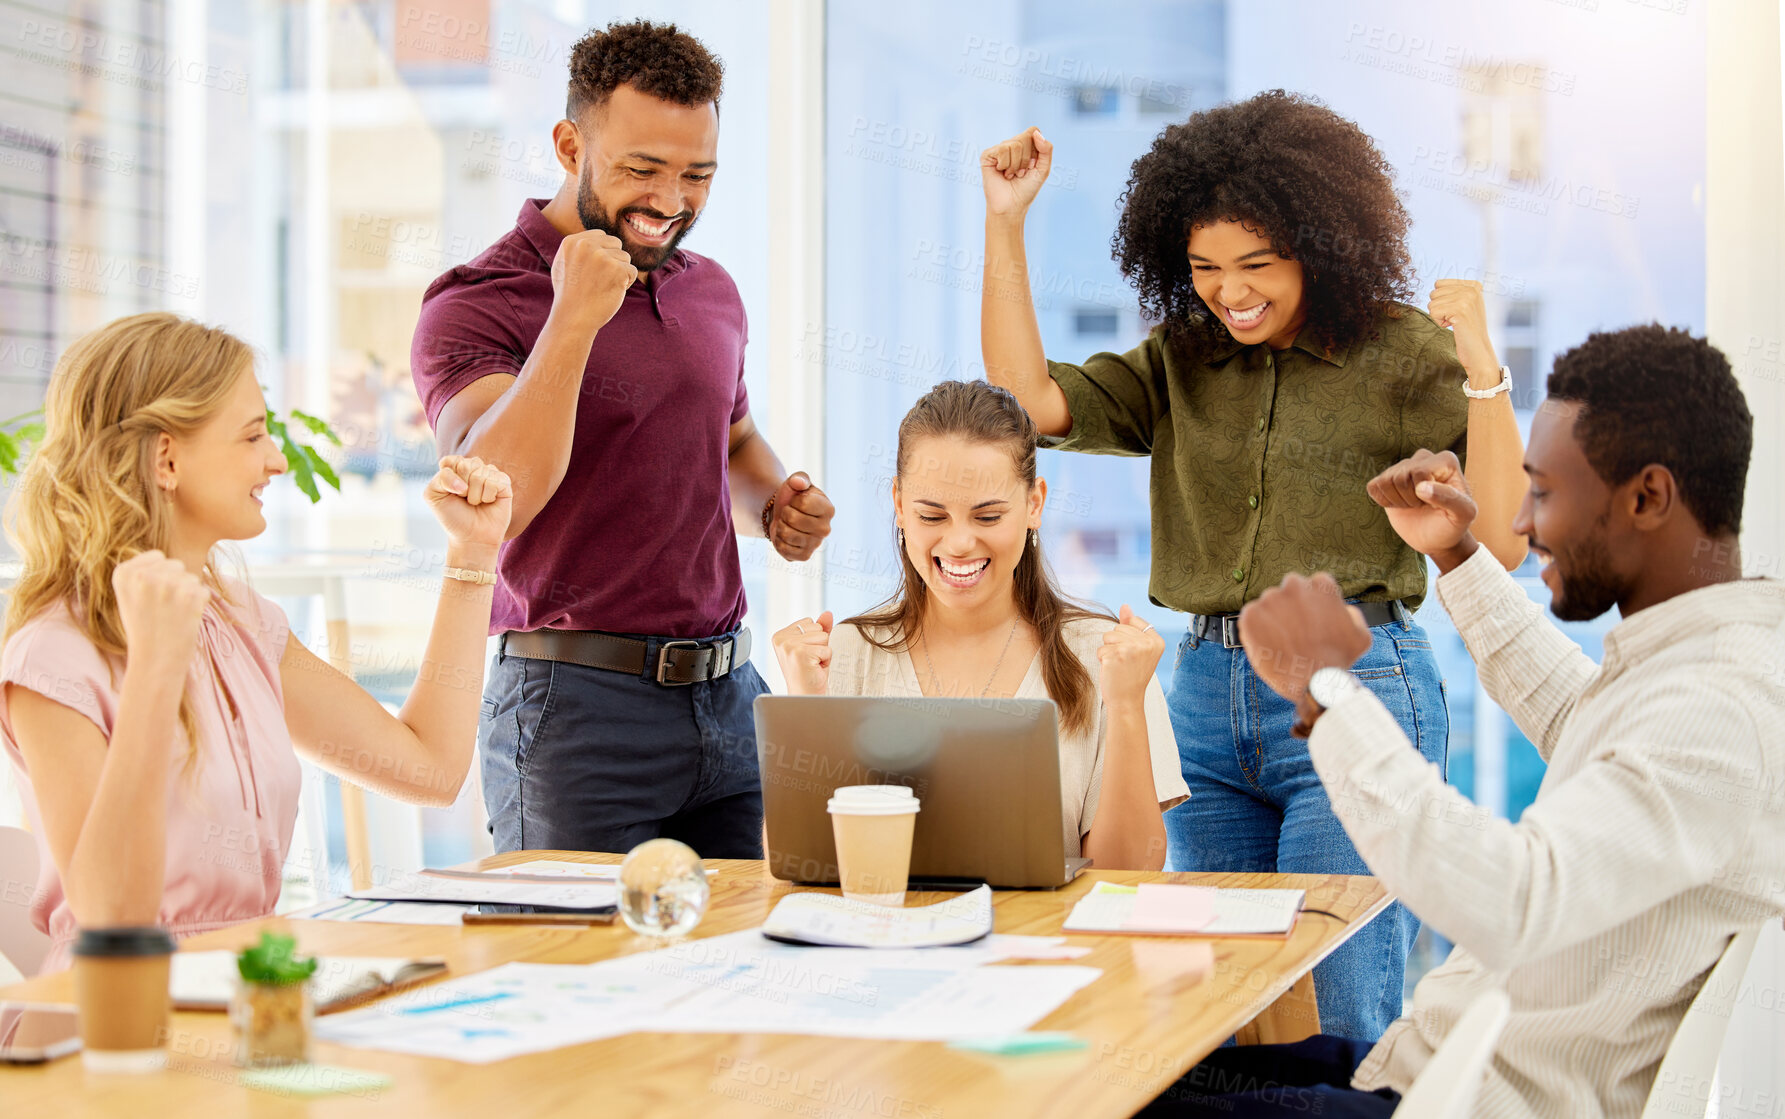 Buy stock photo Happy team celebrate success, sales target business meeting with laptop and staff teamwork goal achievement. Young casual people smile, group working collaboration and company pride in victory fist